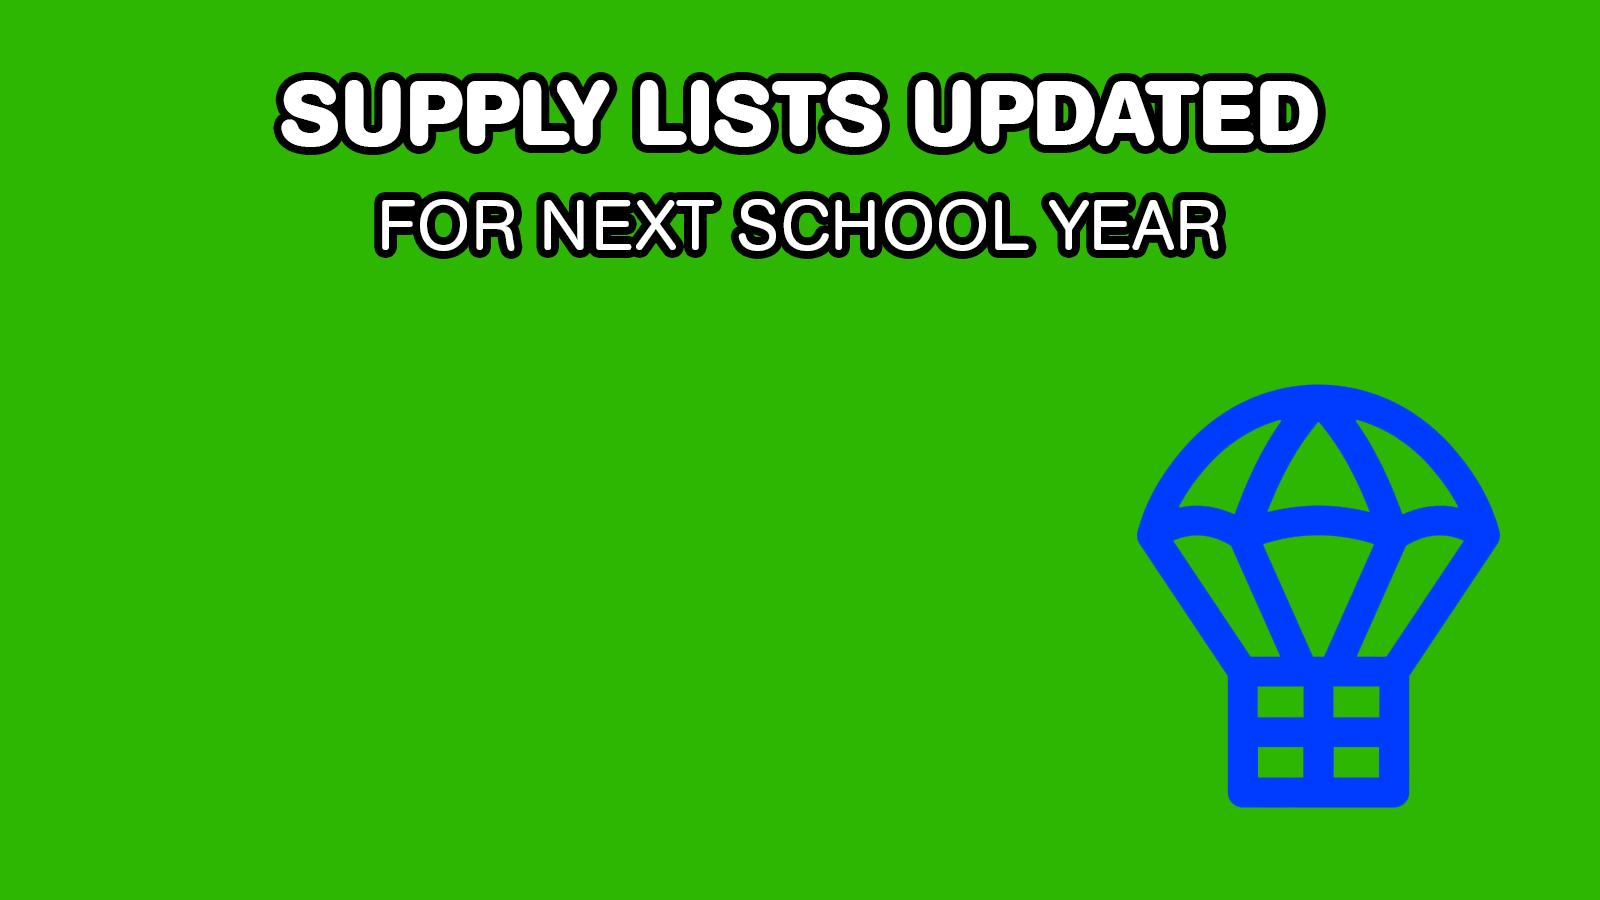 School Supply Kits Now Available for Pre-Order! (Through July 11)